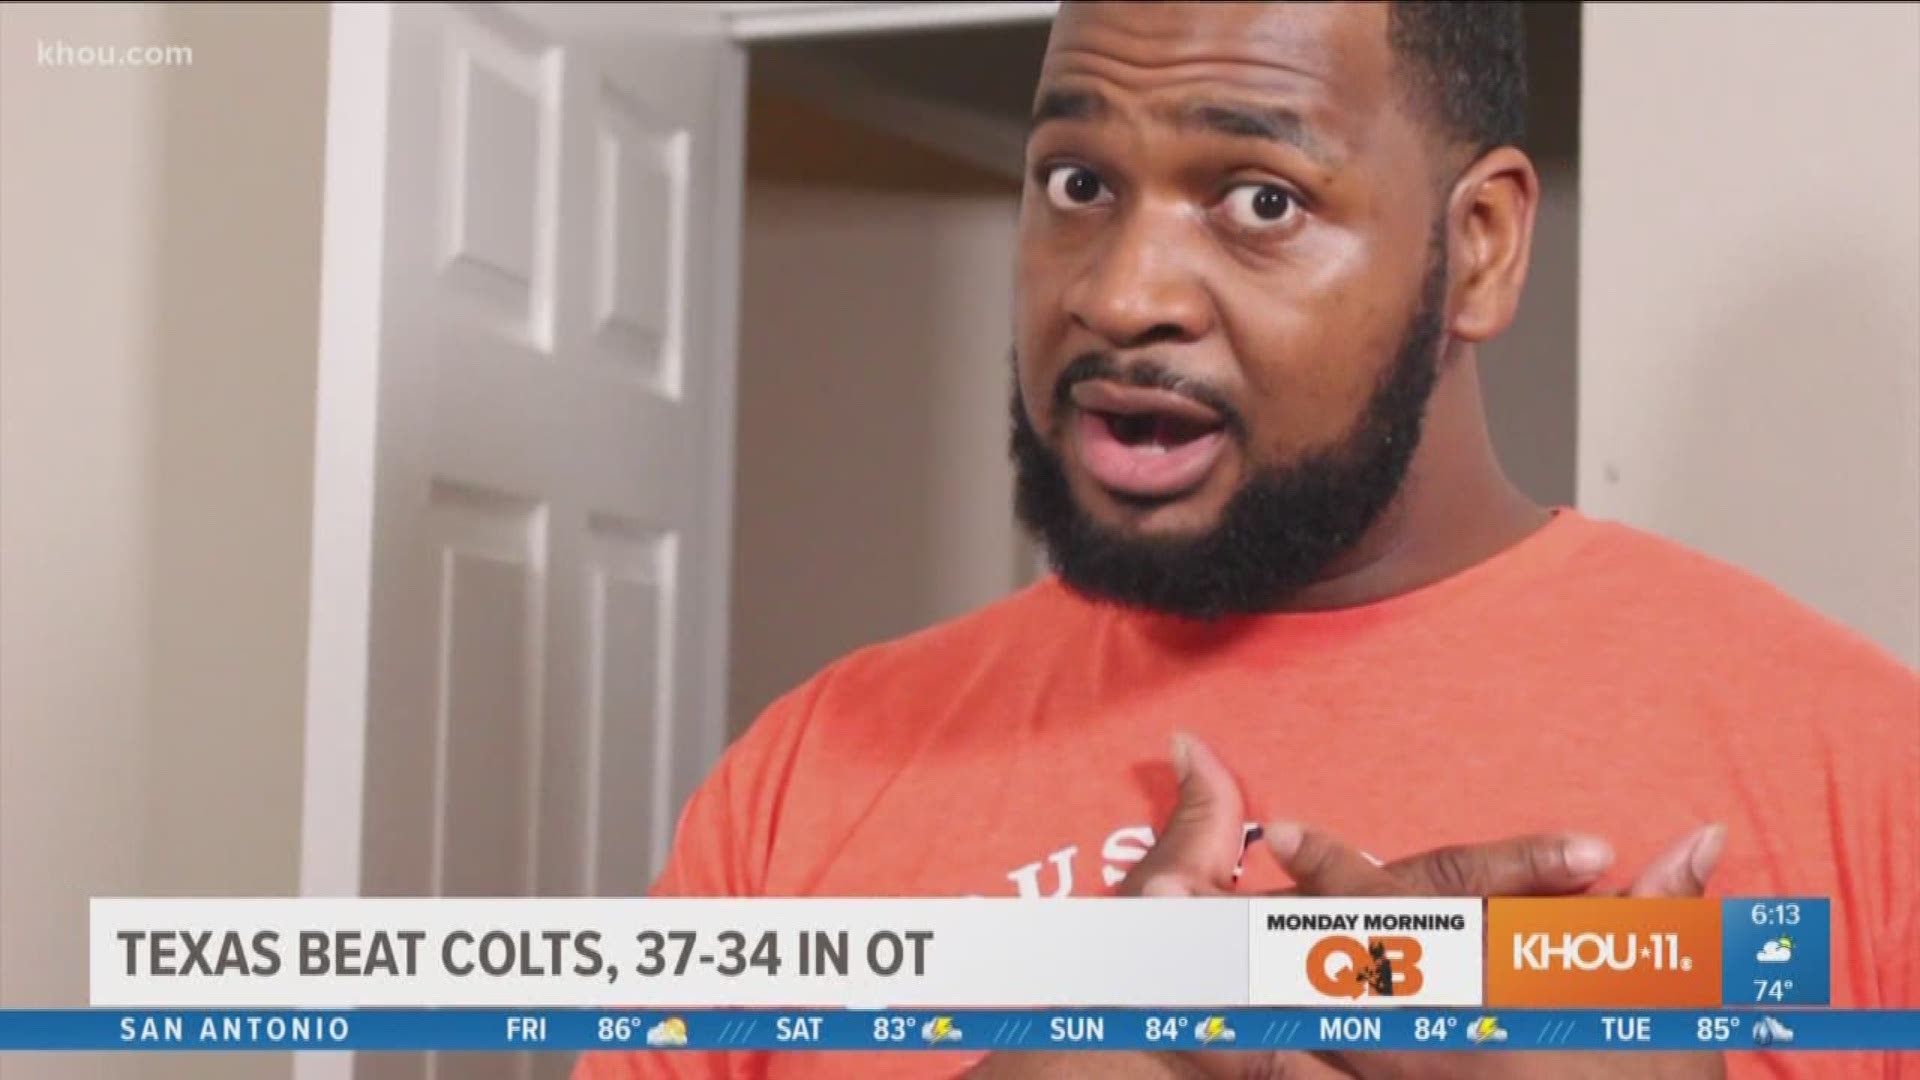 Texans fans finally have something exciting to talk about Monday morning - a win over the Colts! Here's our Monday Morning Quarterback Chinedu Ogu with his take on that close game.